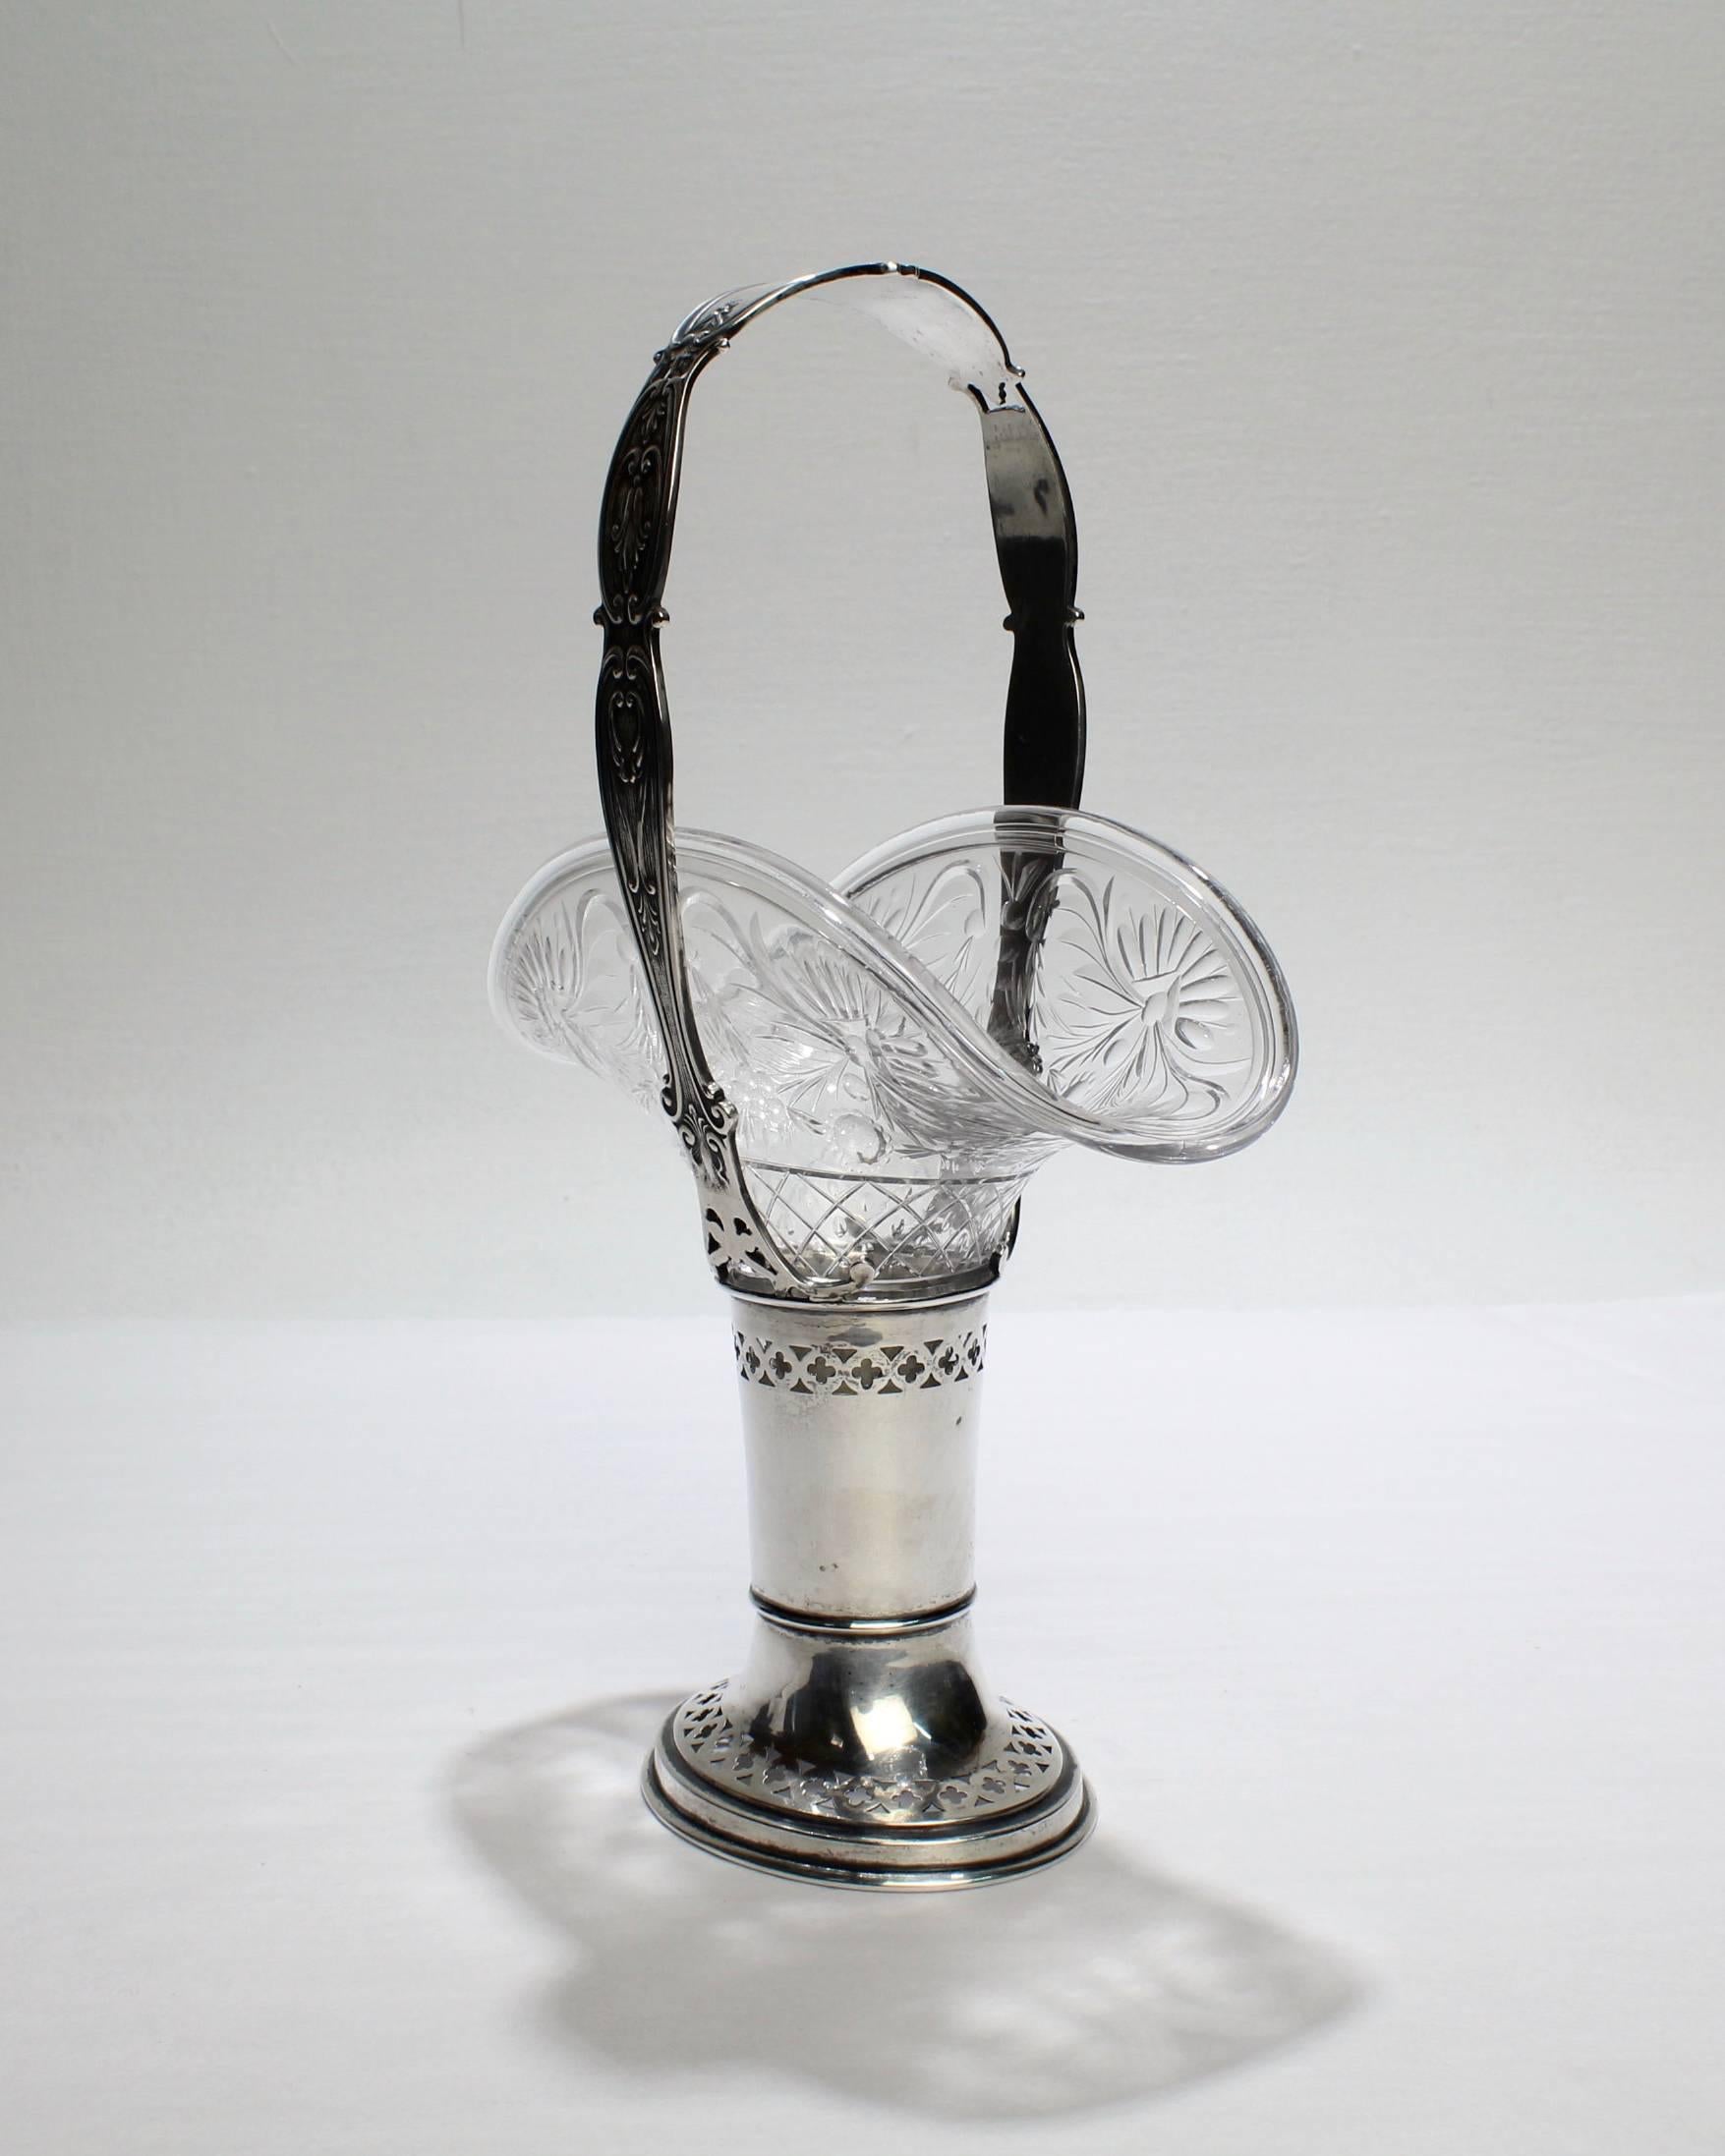 A fine, antique Gorham sterling silver and cut-glass handled basket. The glass insert has etched engraving and the basket has embossed and pierced decoration. An excellent example of an unusual form!

The base bears marks for Gorham, Sterling, and